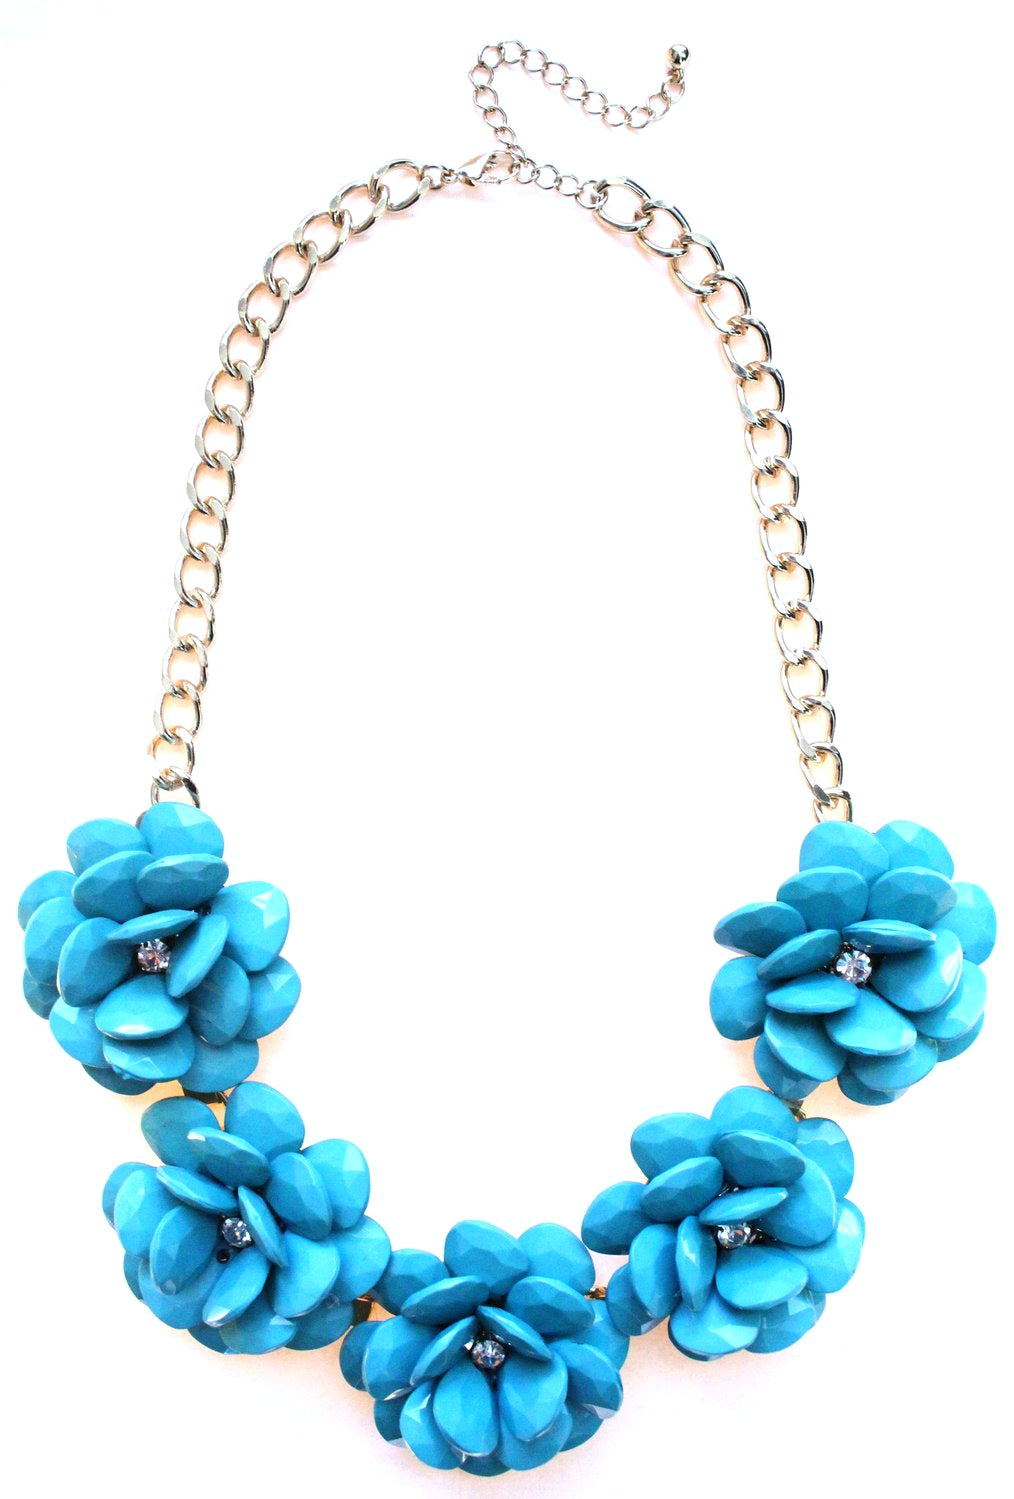 Beaded Rosette Statement Necklace- Turquoise – KAY K COUTURE